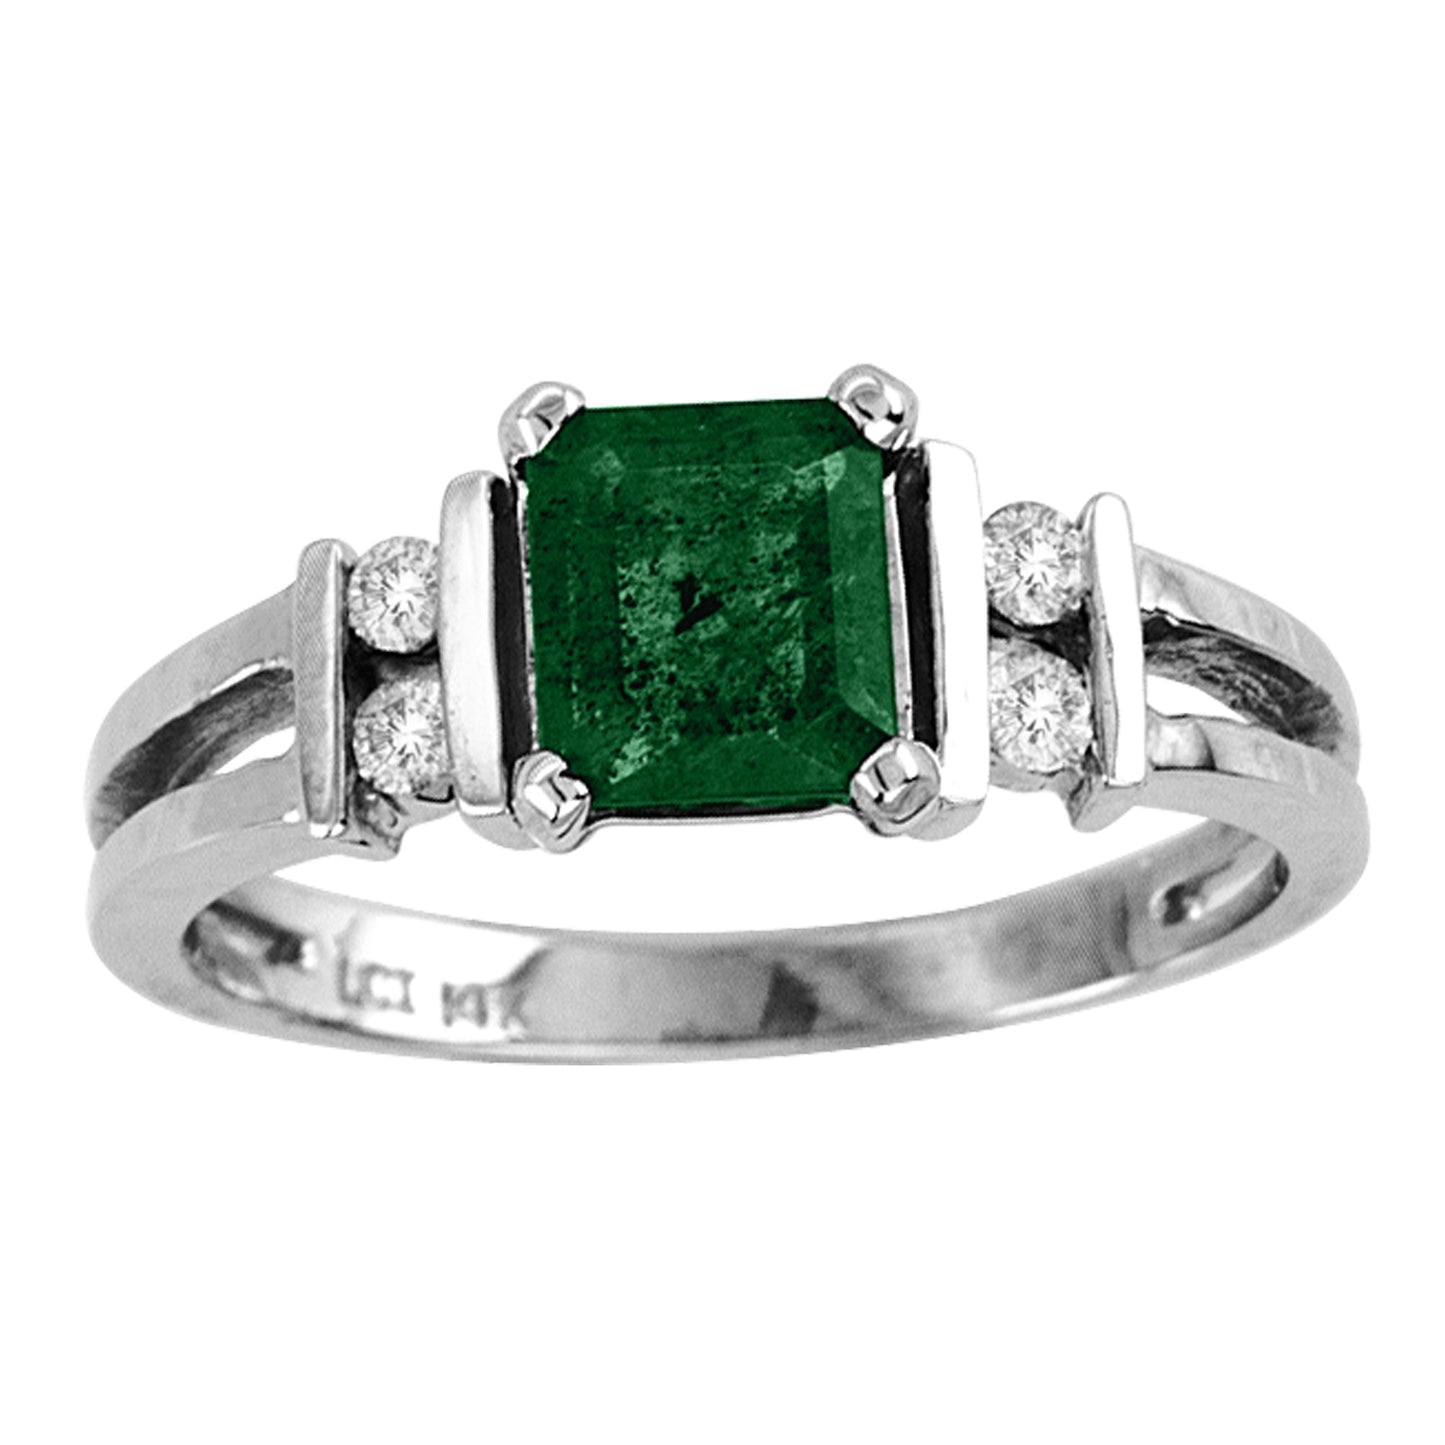 1.0ct Emerald Engagement Ring in 14k White Gold